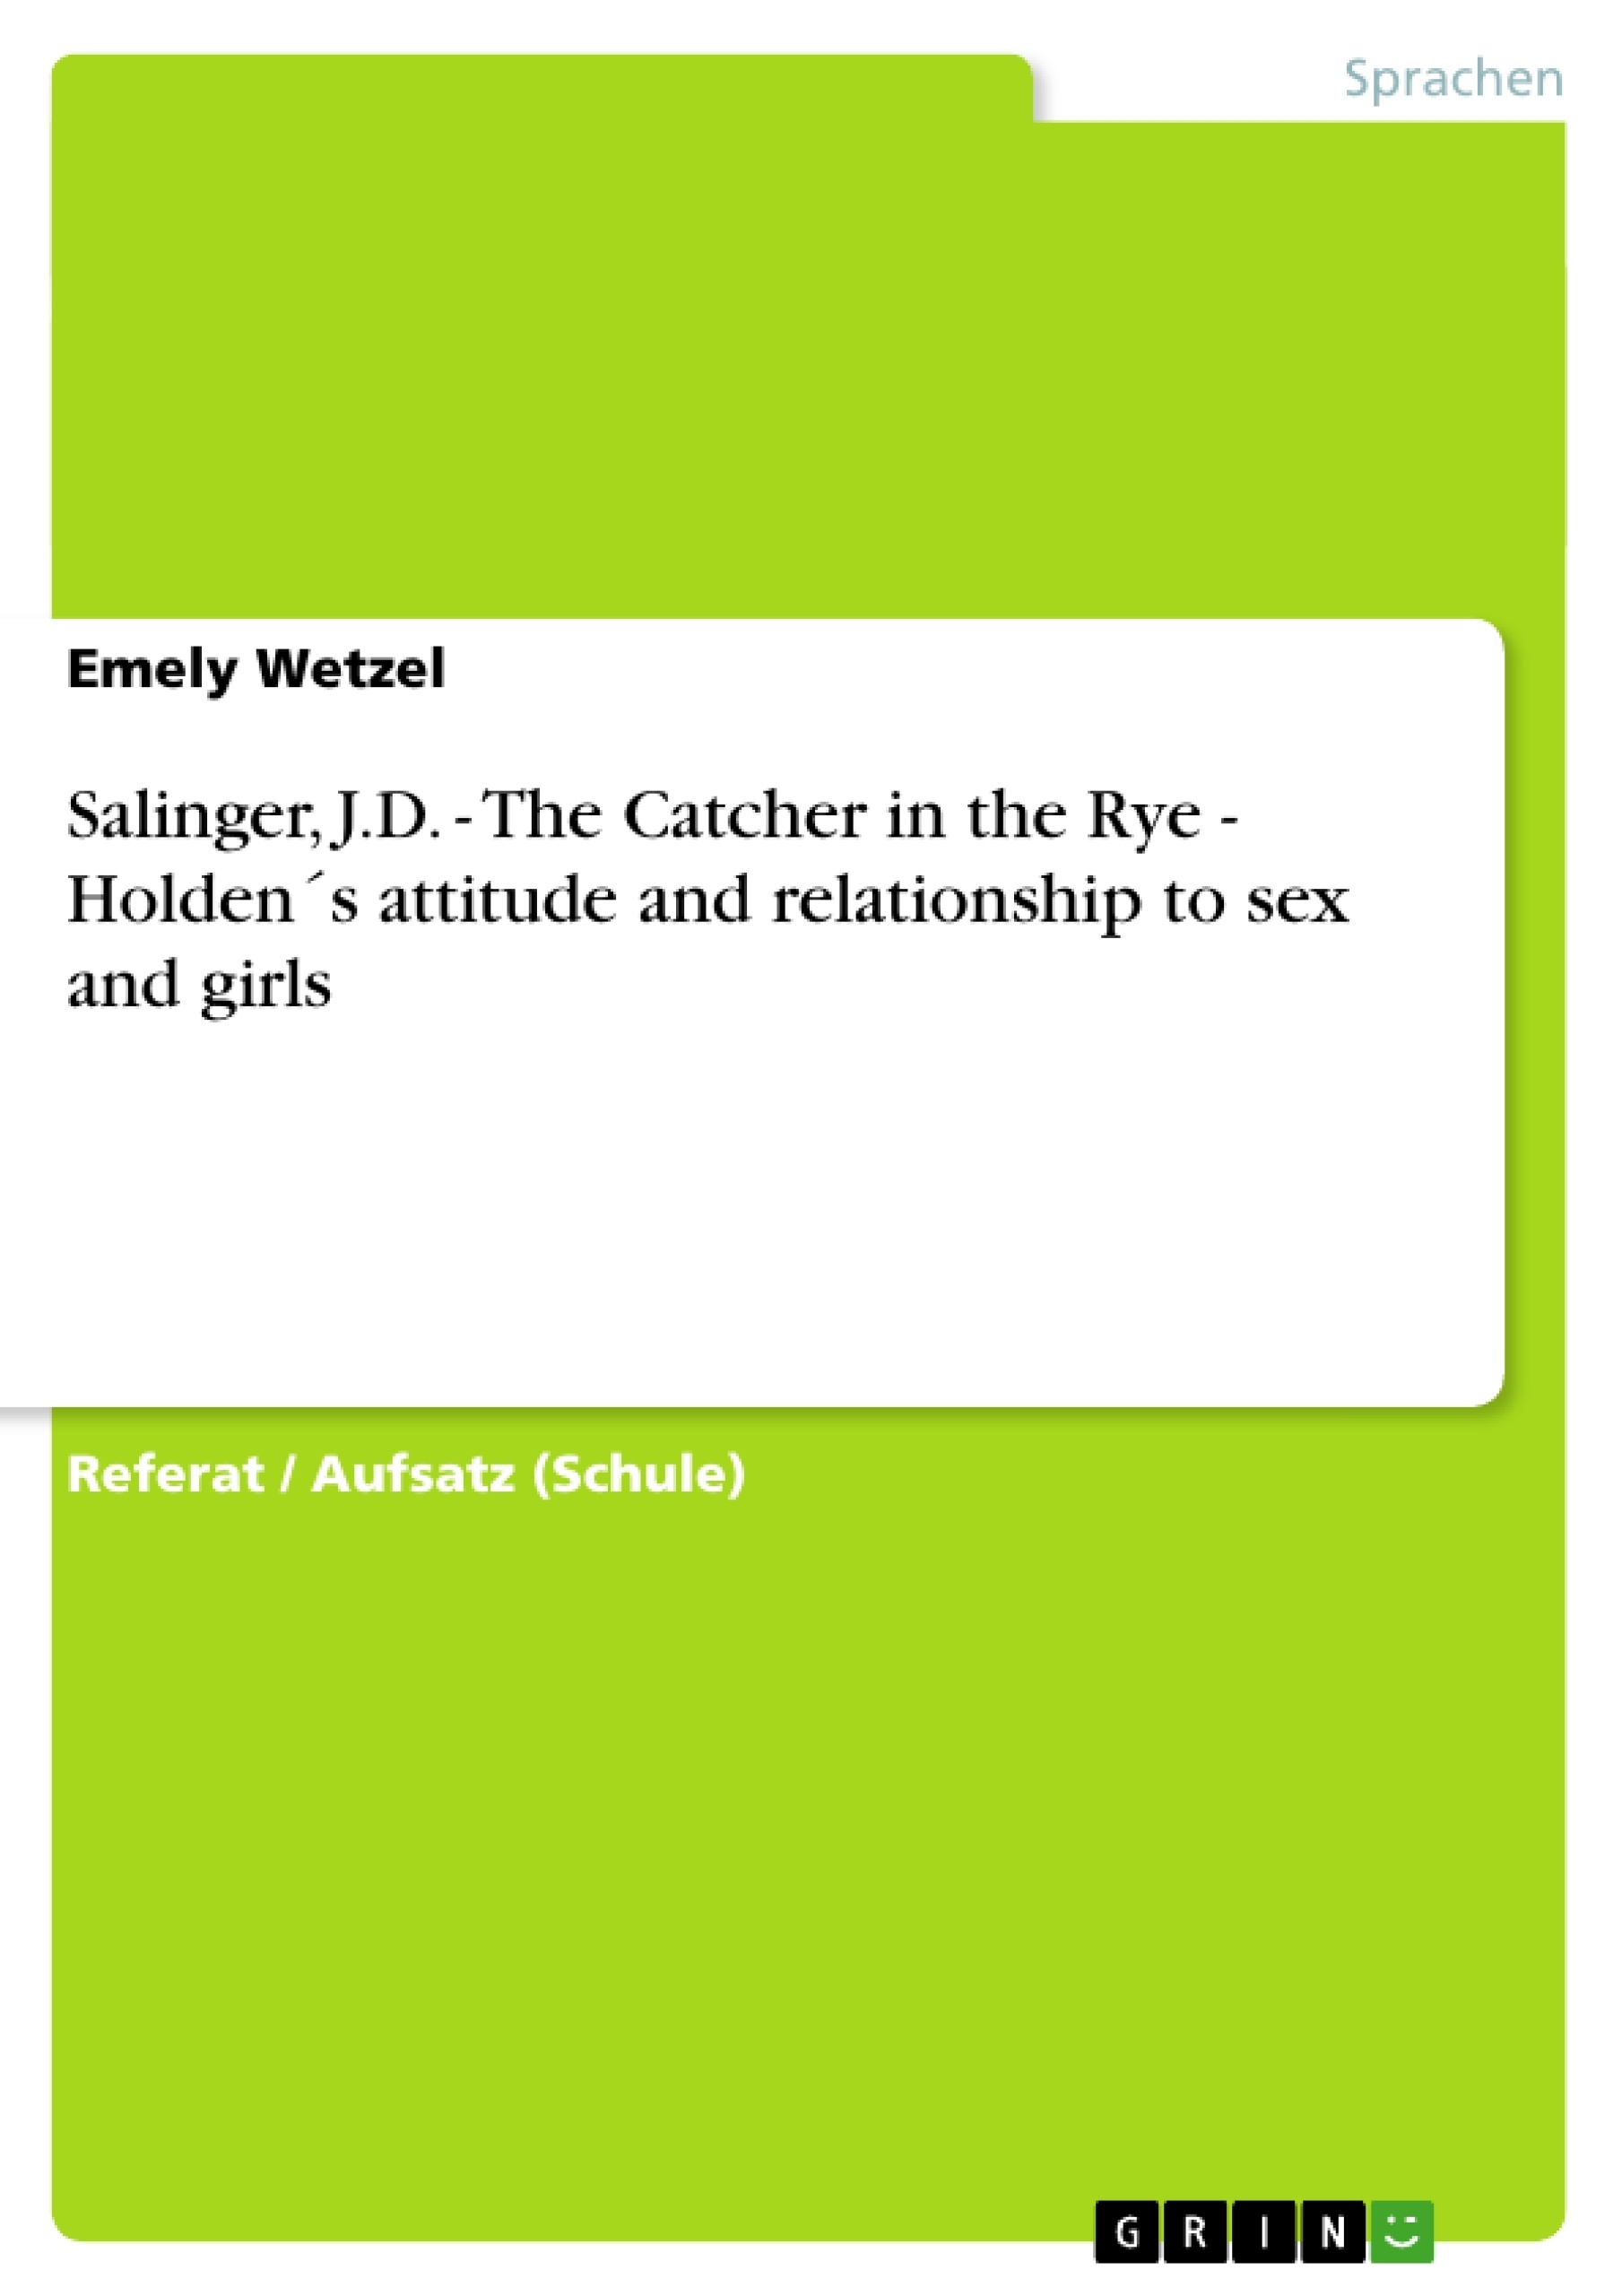 Titre: Salinger, J.D. - The Catcher in the Rye - Holden´s attitude and relationship to sex and girls